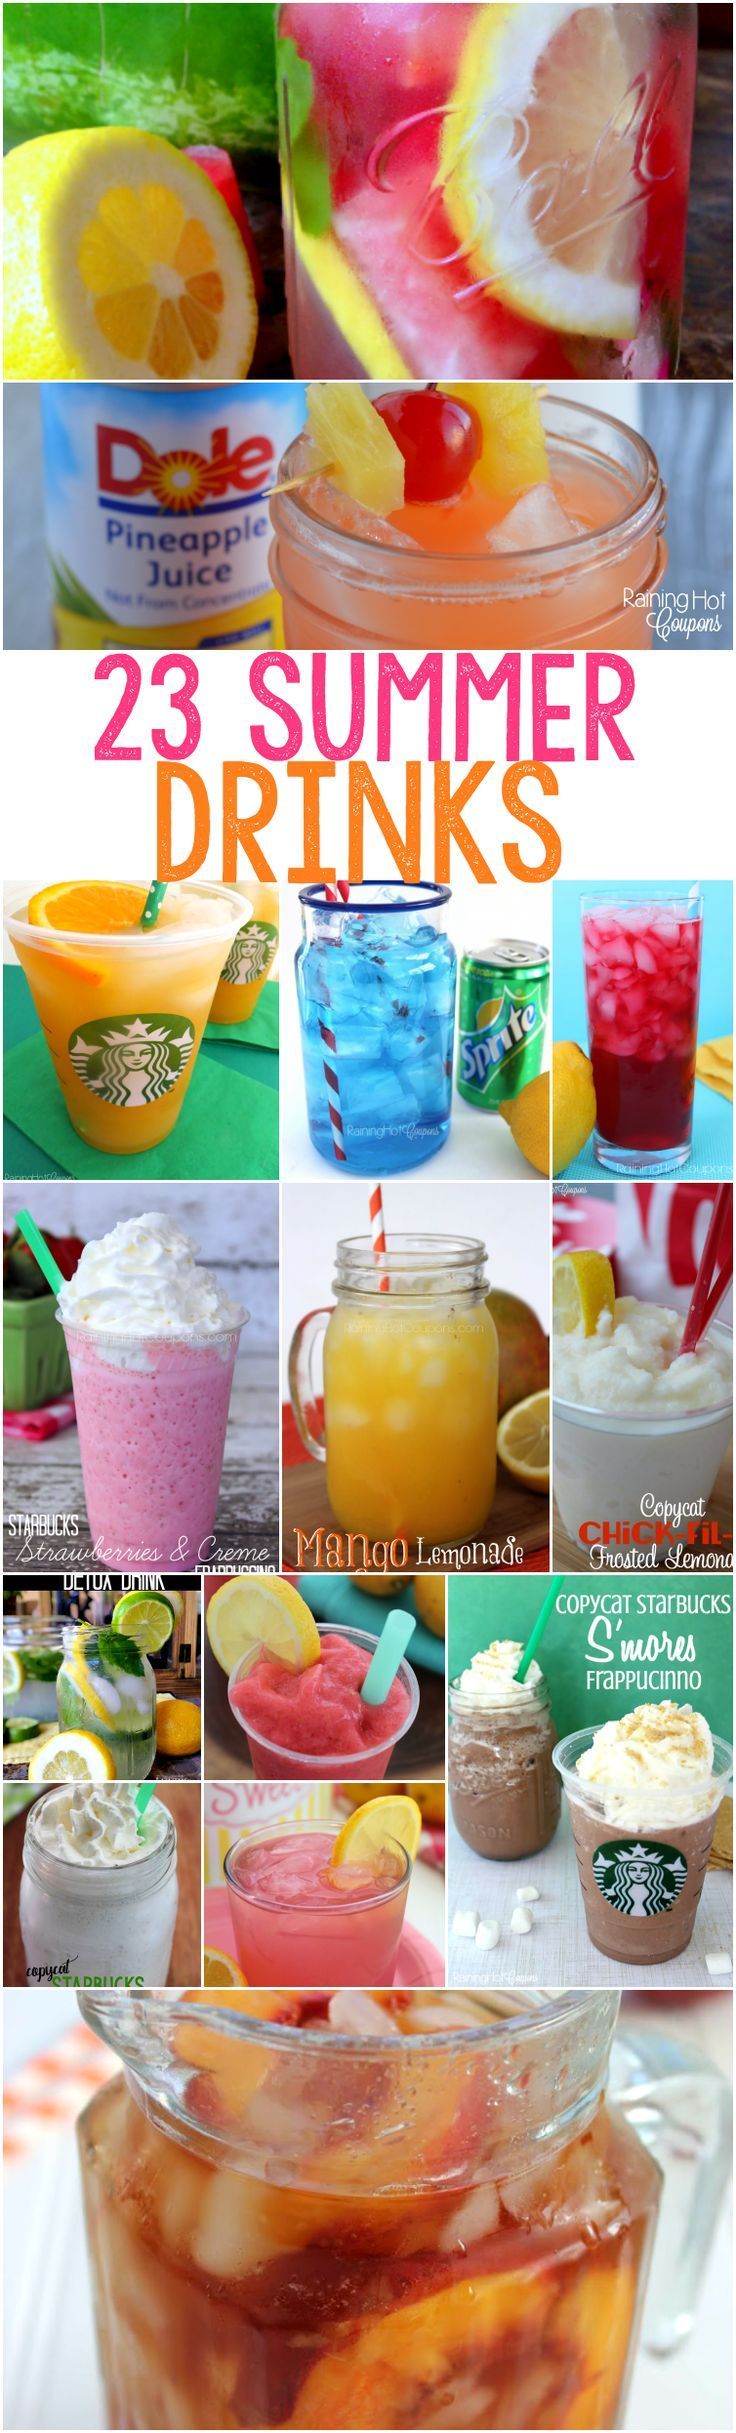 23 Refreshing Drink Recipes for Summer – These Summer drink recipes are perfect for a hot day…they are sweet and easy to make!